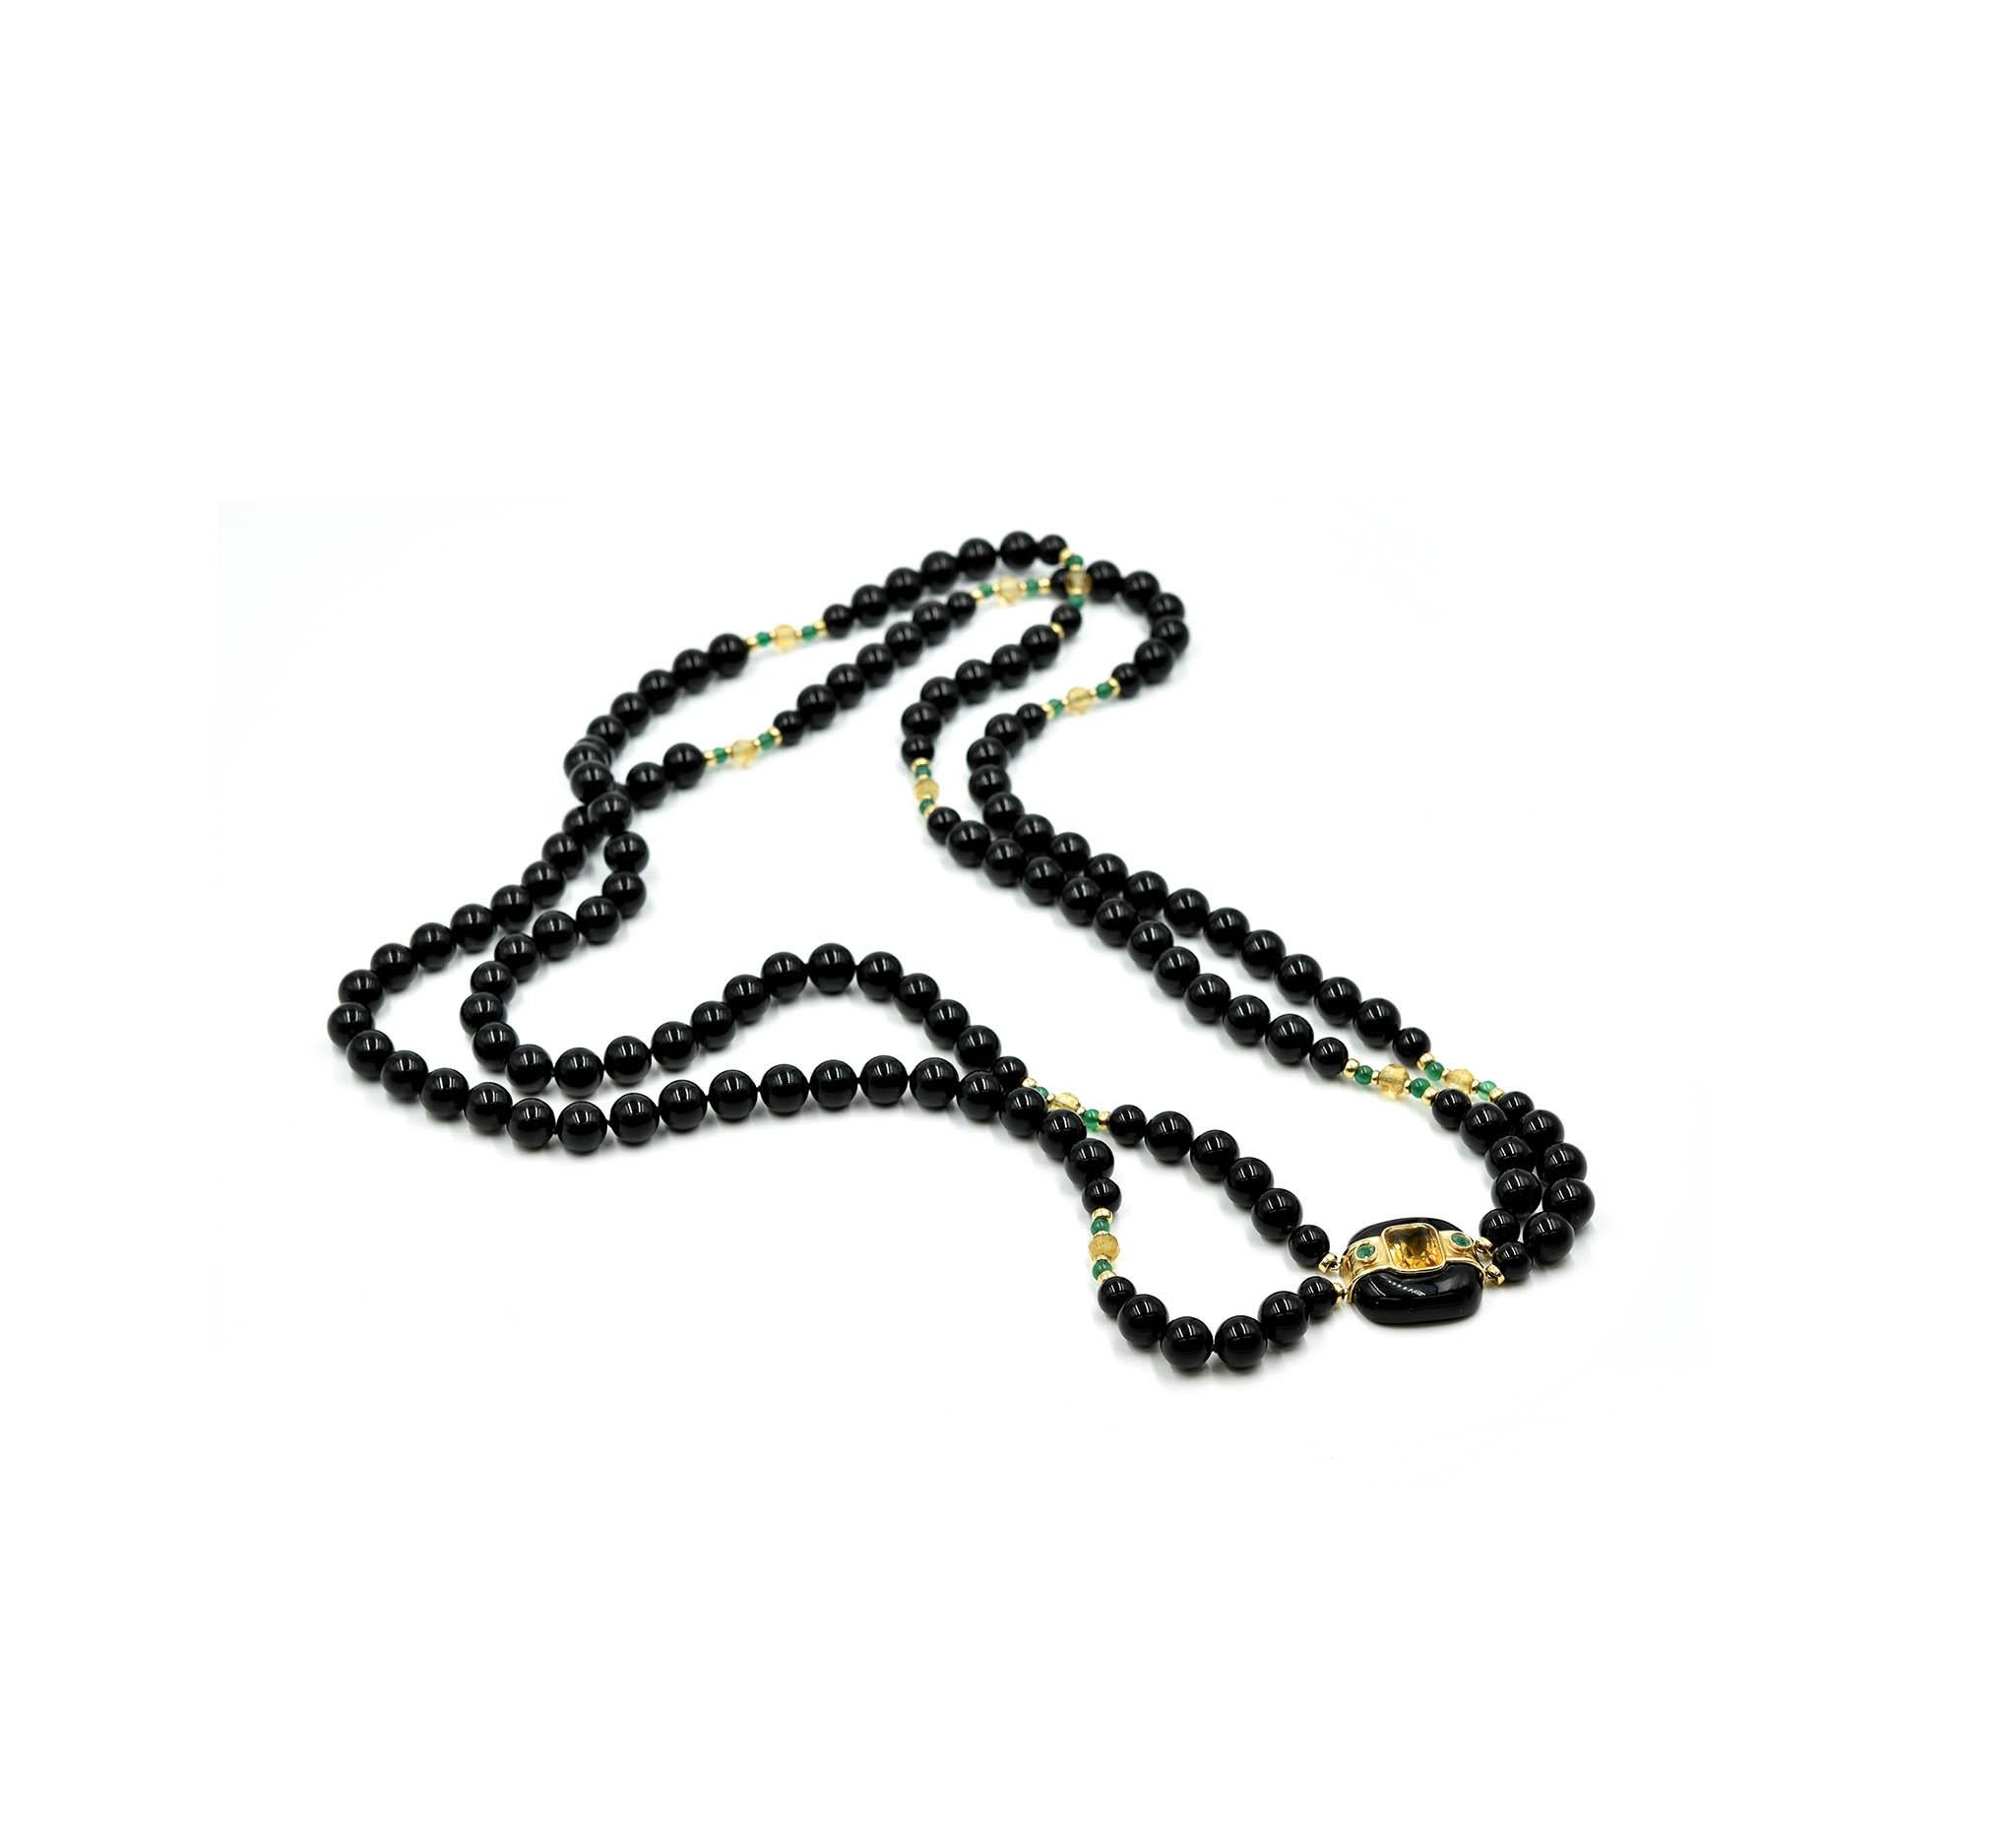 This is a 32” inch strand of beaded black onyx with a citrine and emerald pendant on the center. The strand has briolette cut cirtrine gemstones and cabochon round shaped emeralds stationed. The pendant features a cushion cut citrine gemstone that